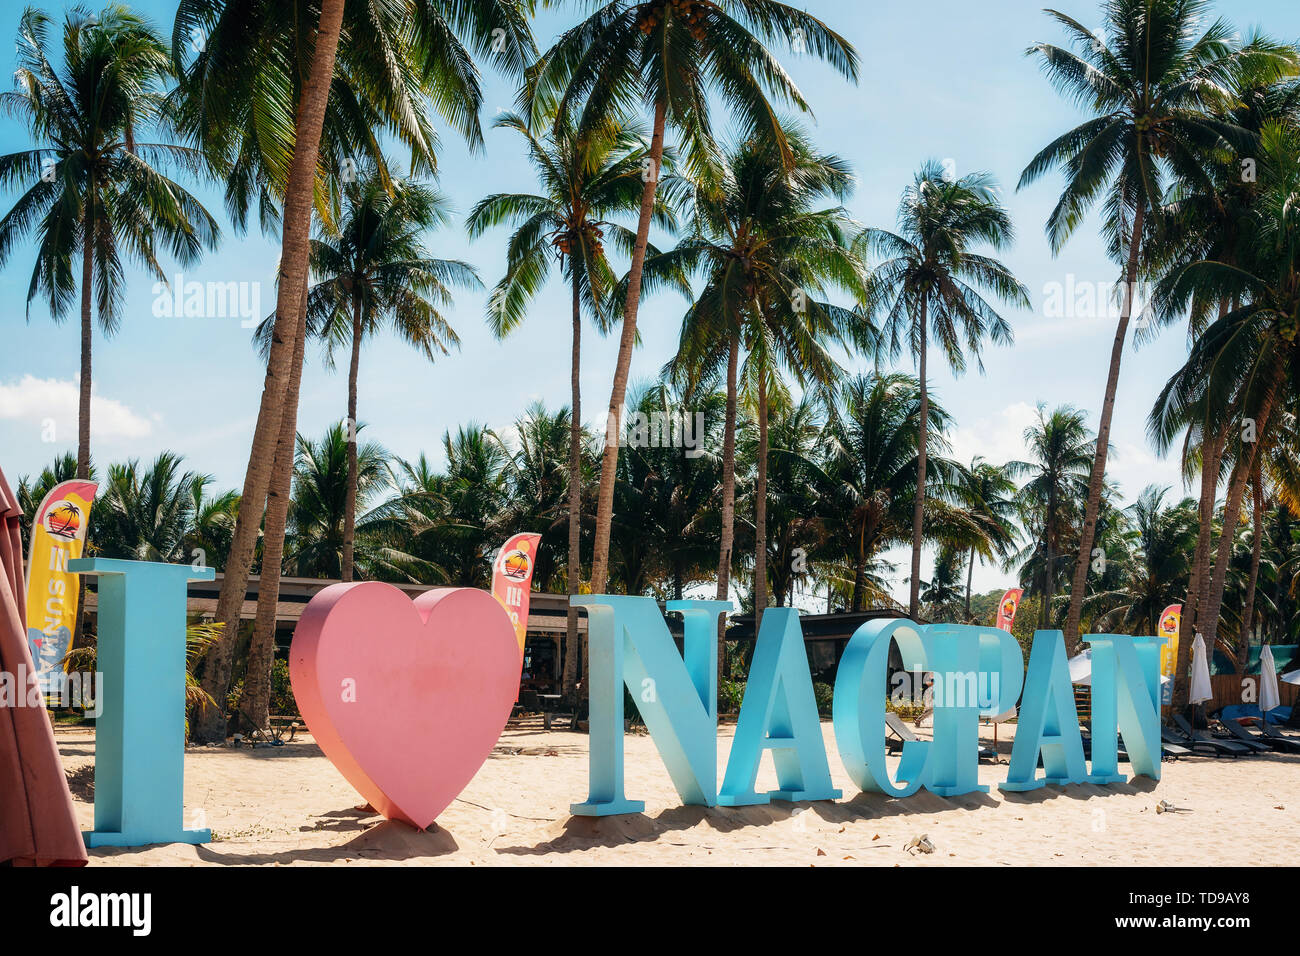 Nacpan beach, Palawan, Philippines - February 1, 2019: View of the blue and pink I love Nacpan sign on beach against palm trees, Palawan, Philippines Stock Photo